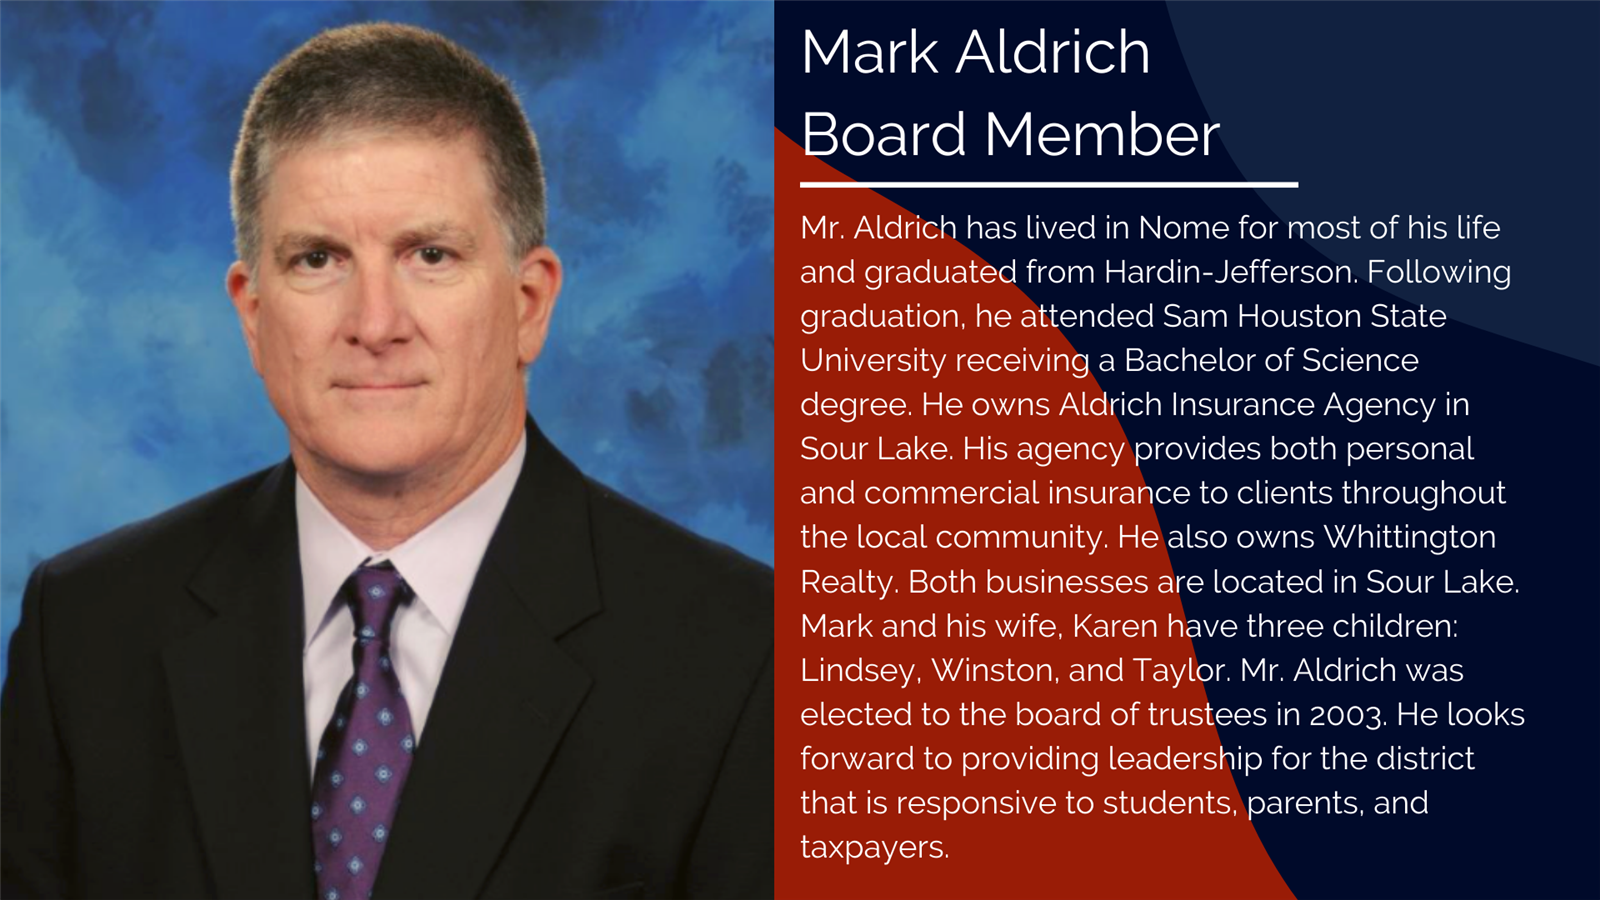 Mr. Aldrich has lived in Nome for most of his life and graduated from Hardin-Jefferson. Following graduation, he attended Sam